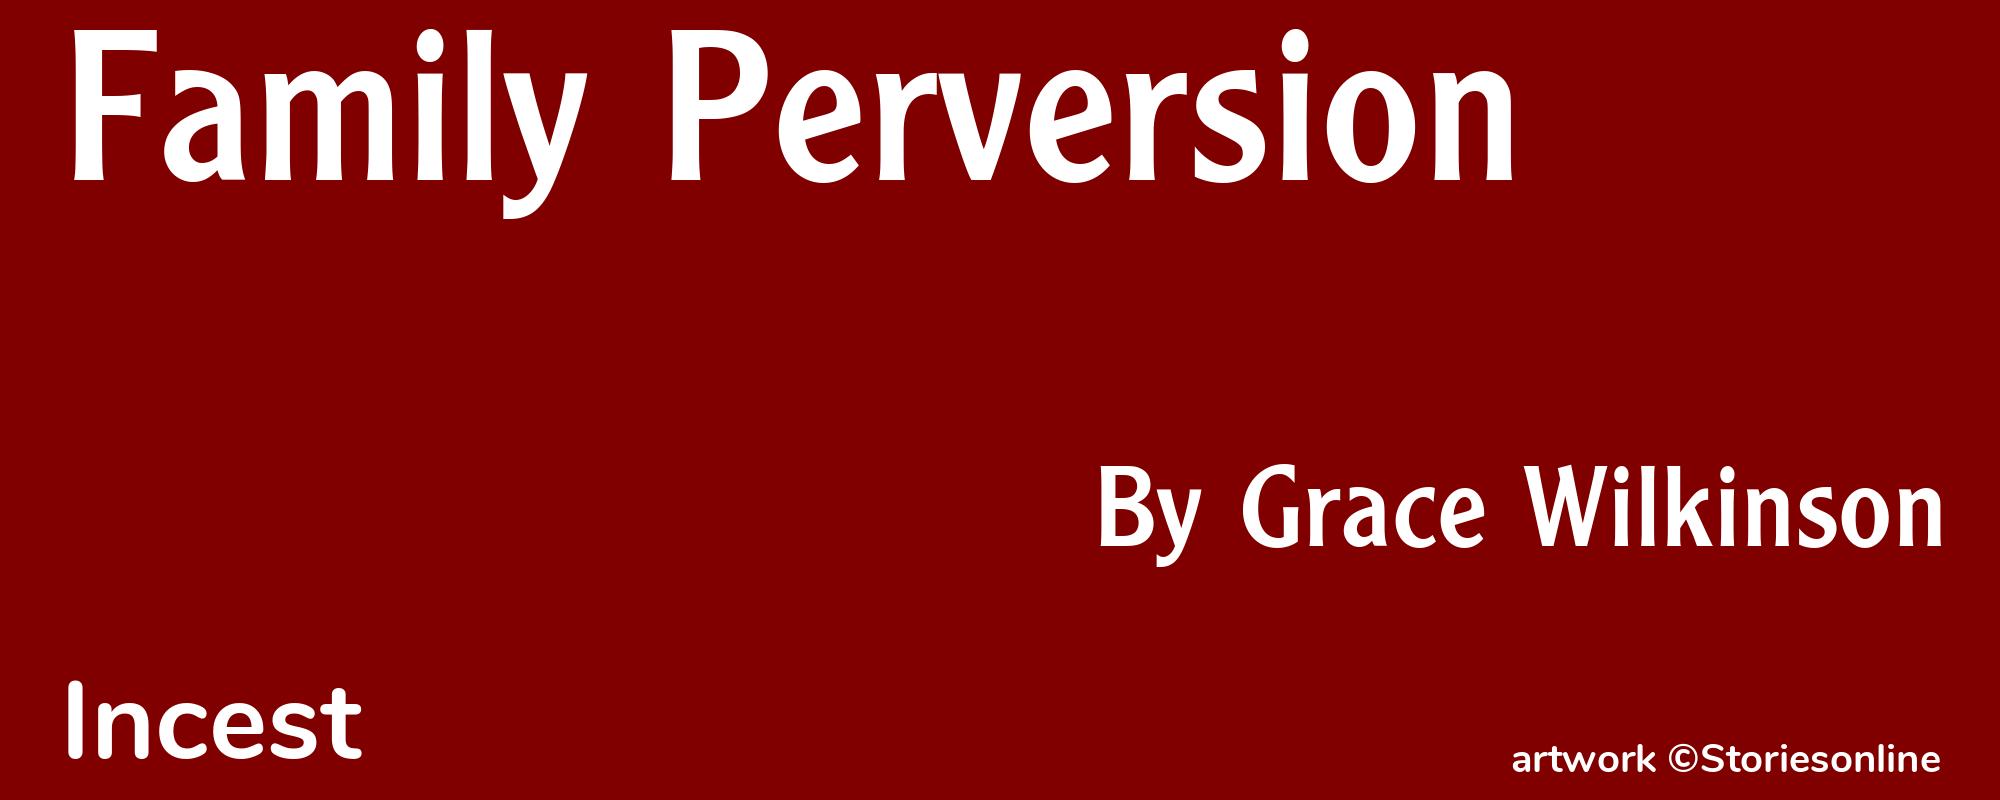 Family Perversion - Cover